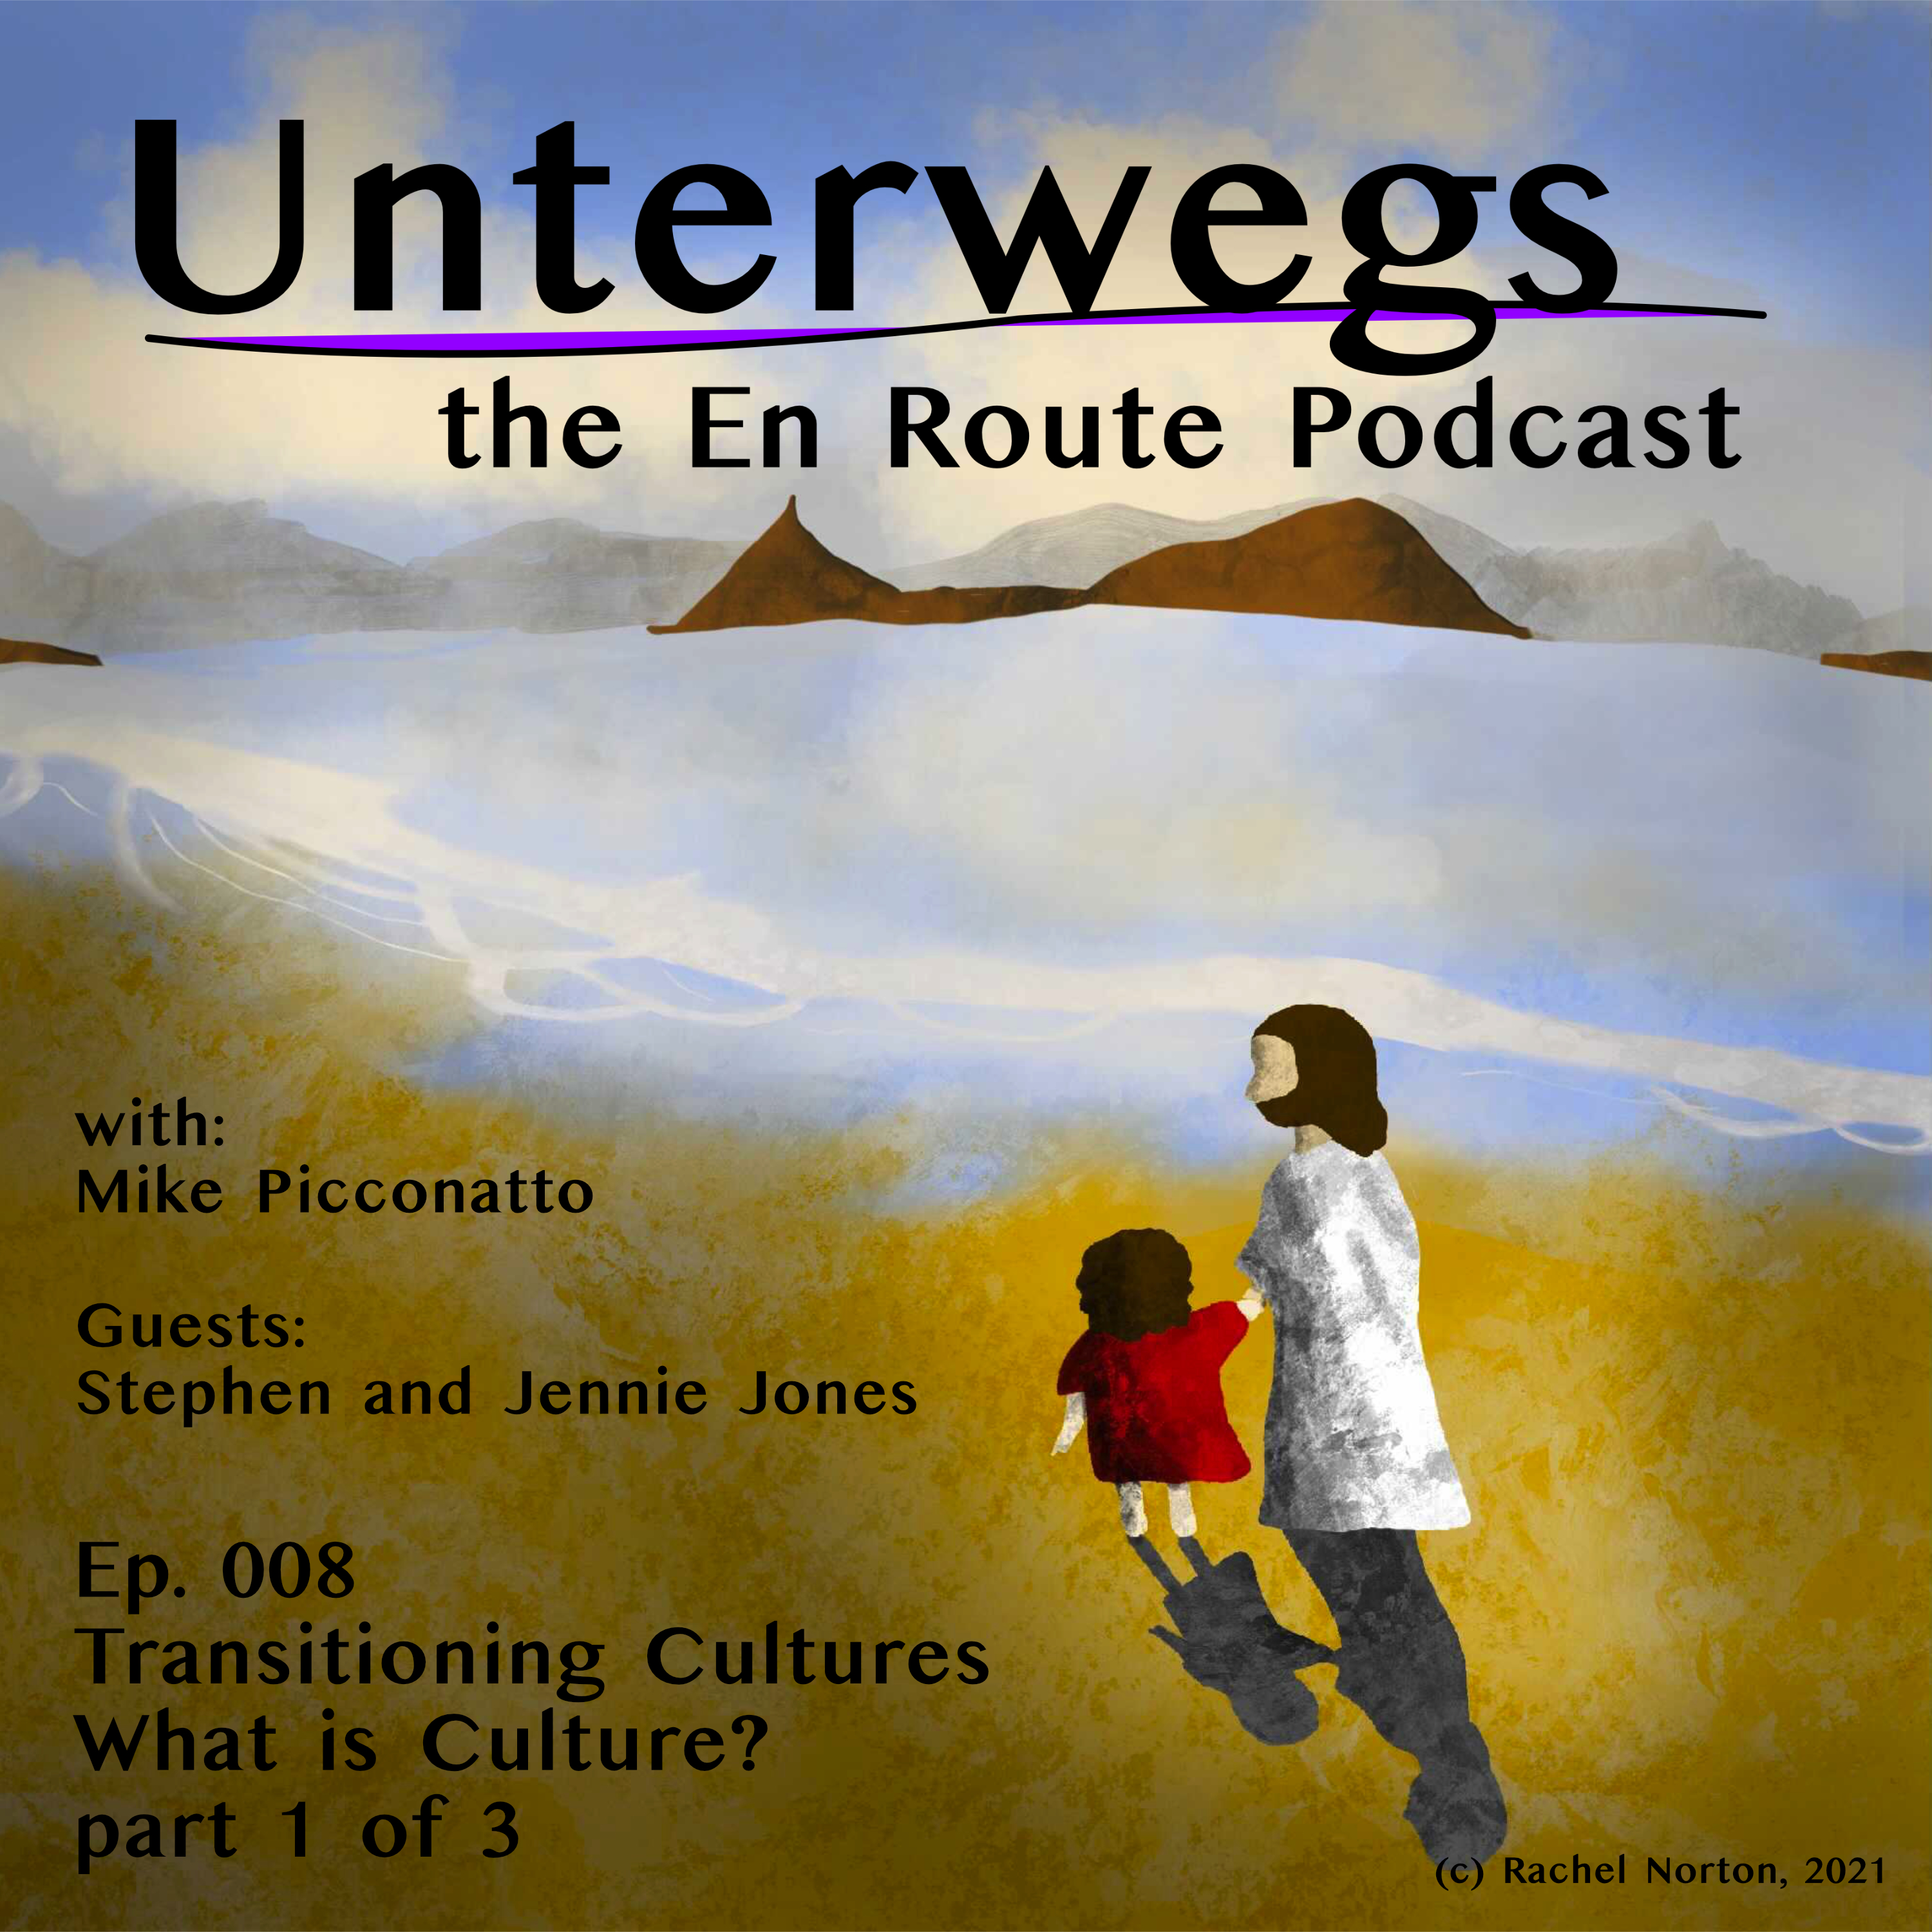 Episode 008 - What is Culture? - part 1 of 3